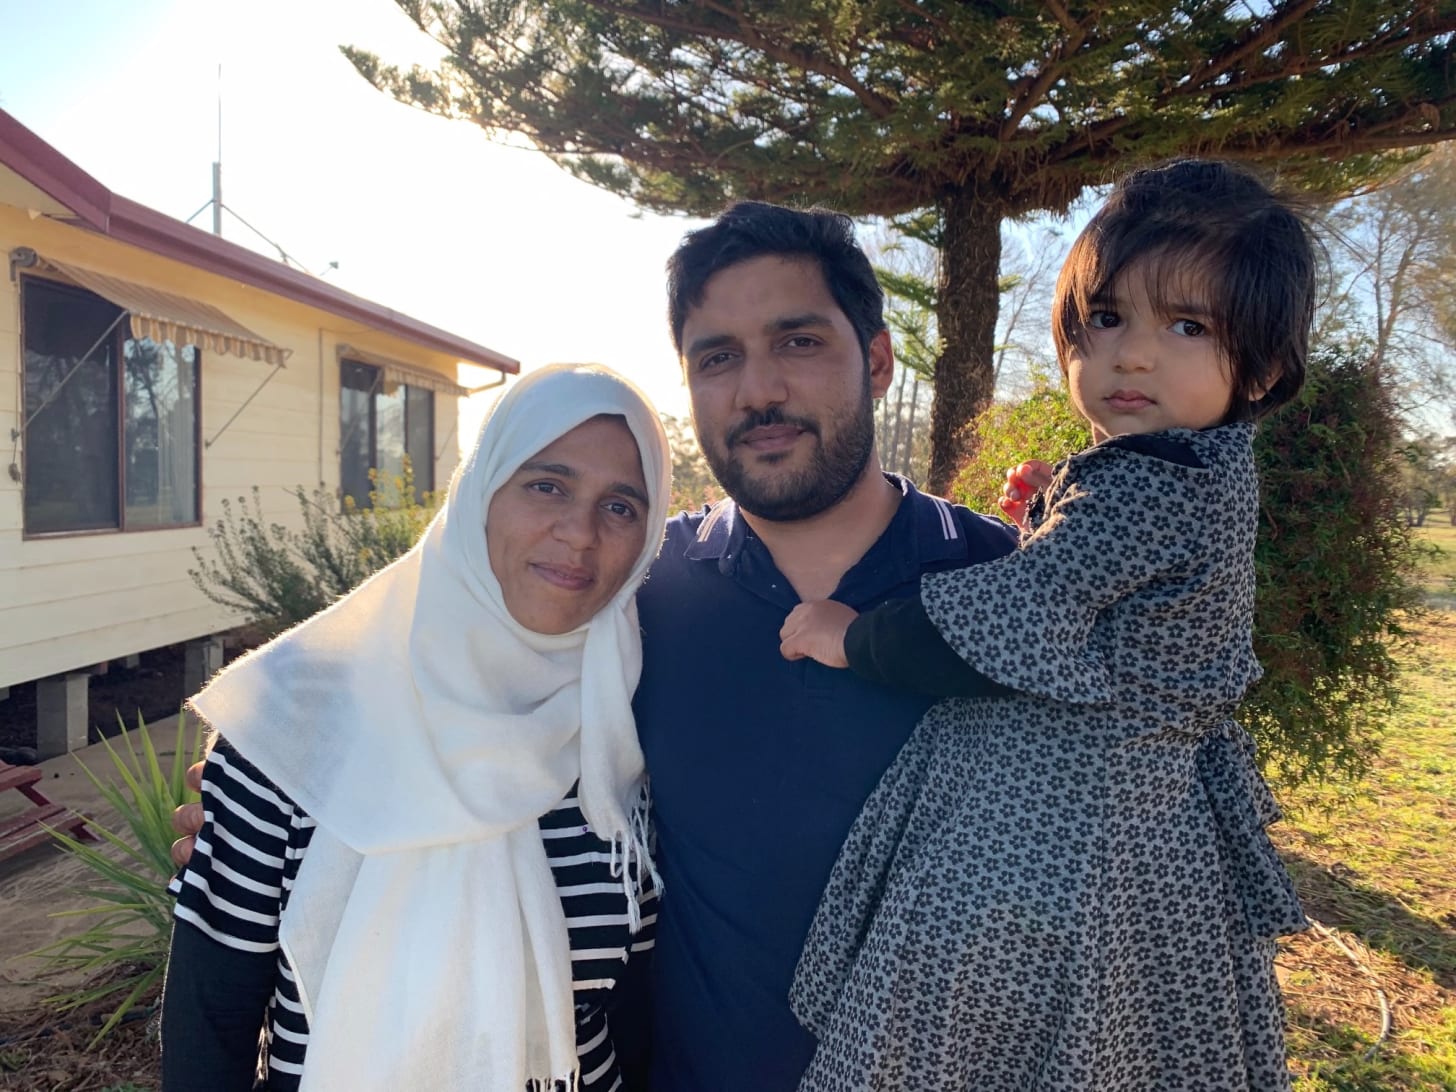 Ali Hussein, wife Ayesha and their daughter Durre are living in Leeton, NSW, after moving from Perth.